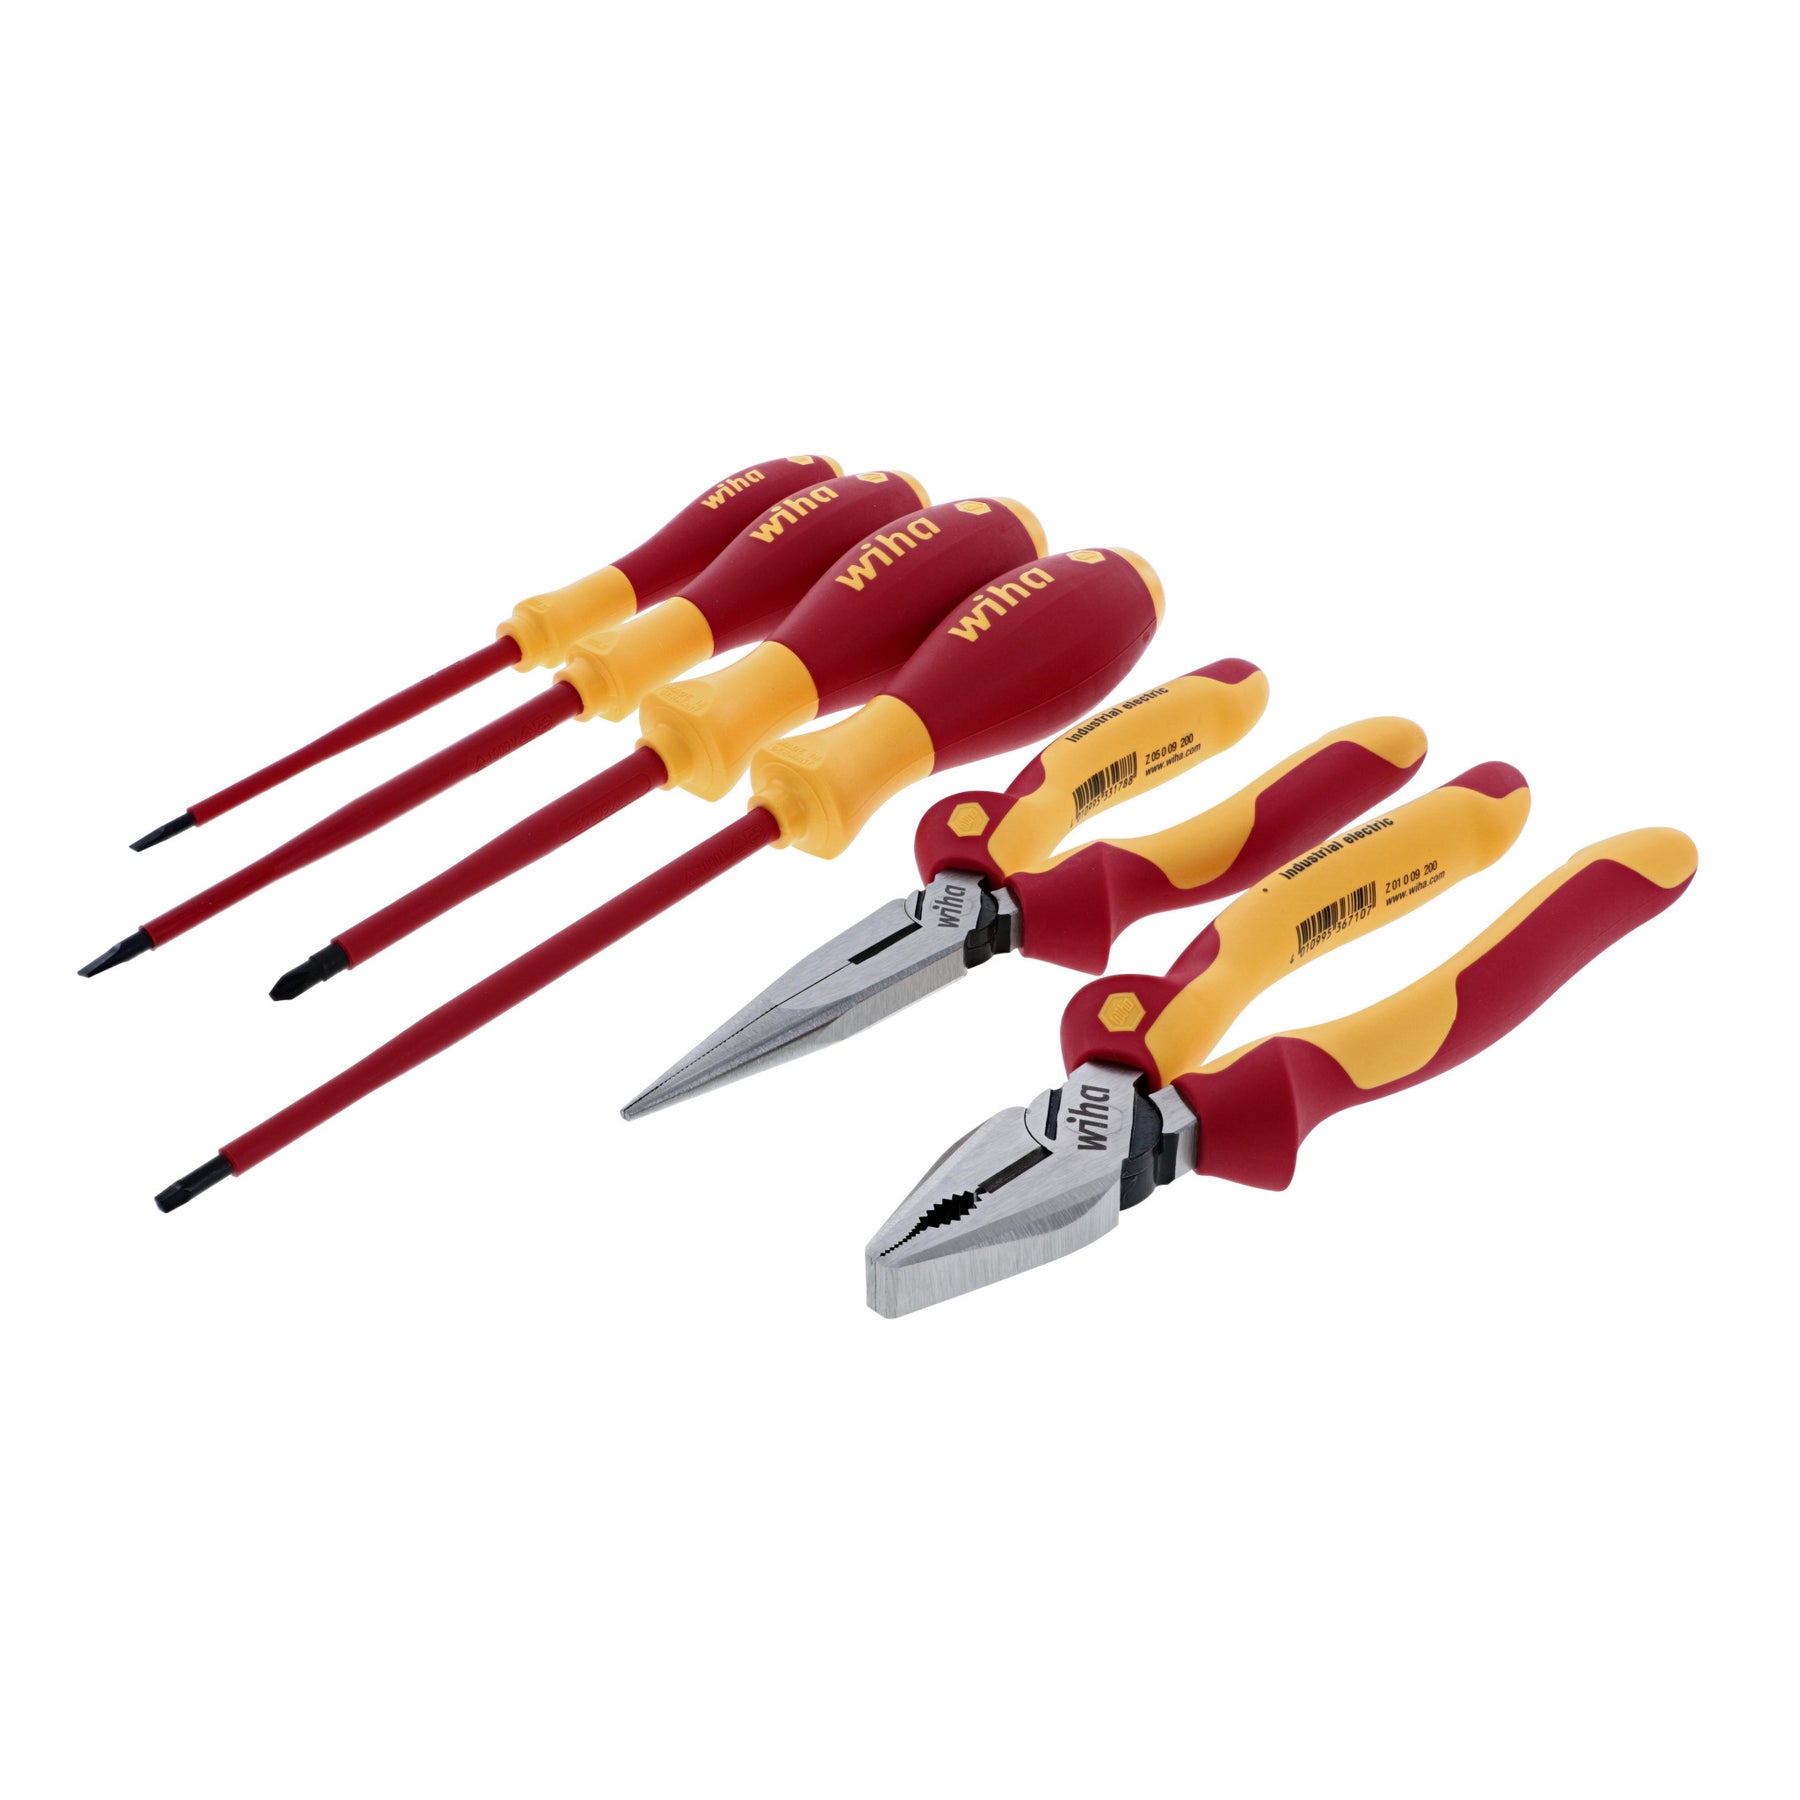 6 Piece Insulated Industrial Pliers and Screwdriver Set